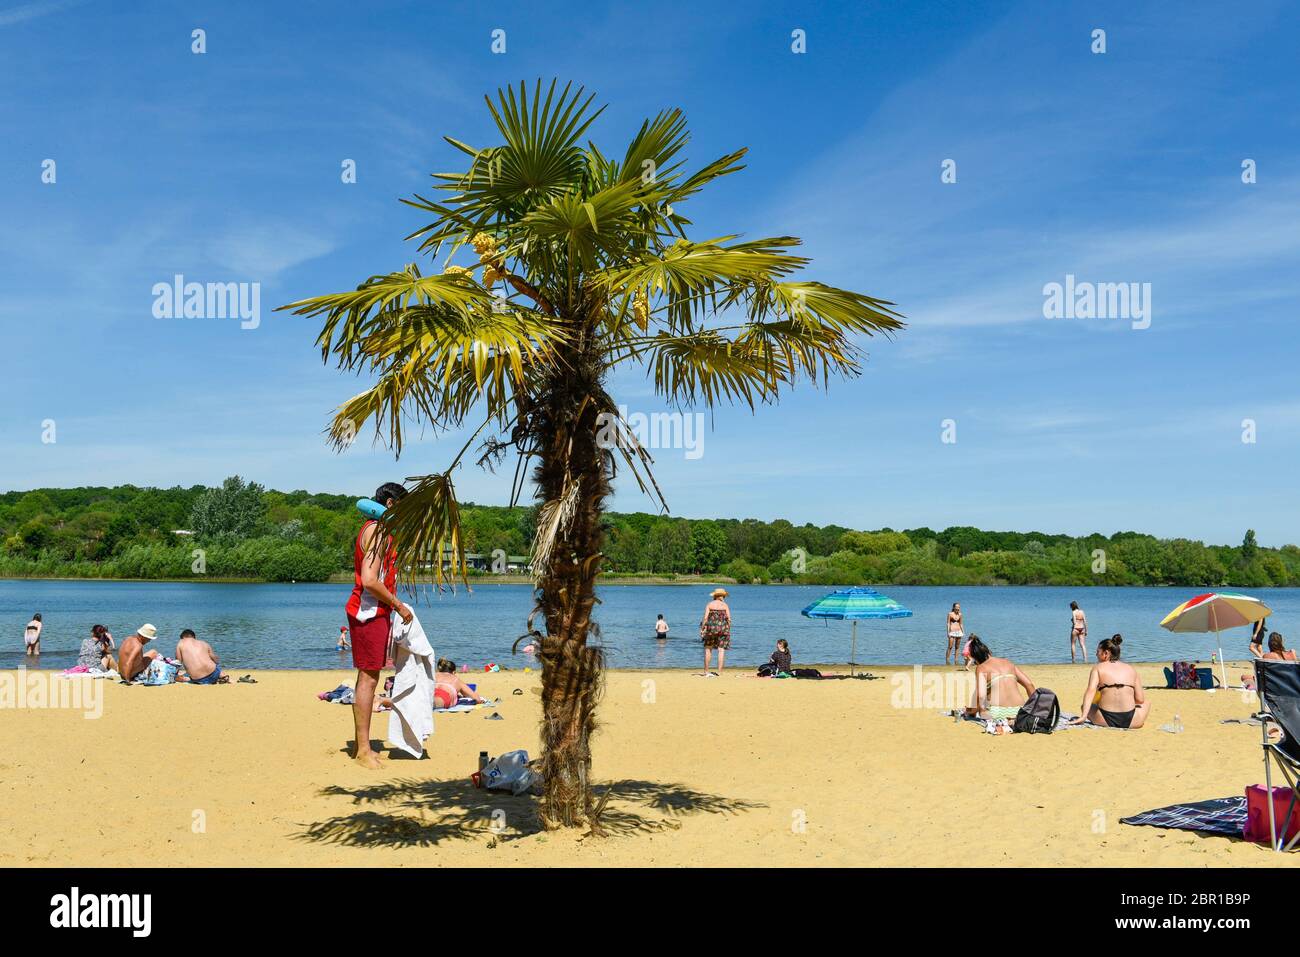 London, UK.  20 May 2020.  UK Weather - A palm tree on the beach gives a tropical feel as people take advantage of the easing of certain coronavirus pandemic lockdown restrictions to enjoy the sunshine and warm weather at Ruislip Lido in north west London.   The forecast is for temperatures to rise to 29C, the hottest day of the year so far.  Credit: Stephen Chung / Alamy Live News Stock Photo